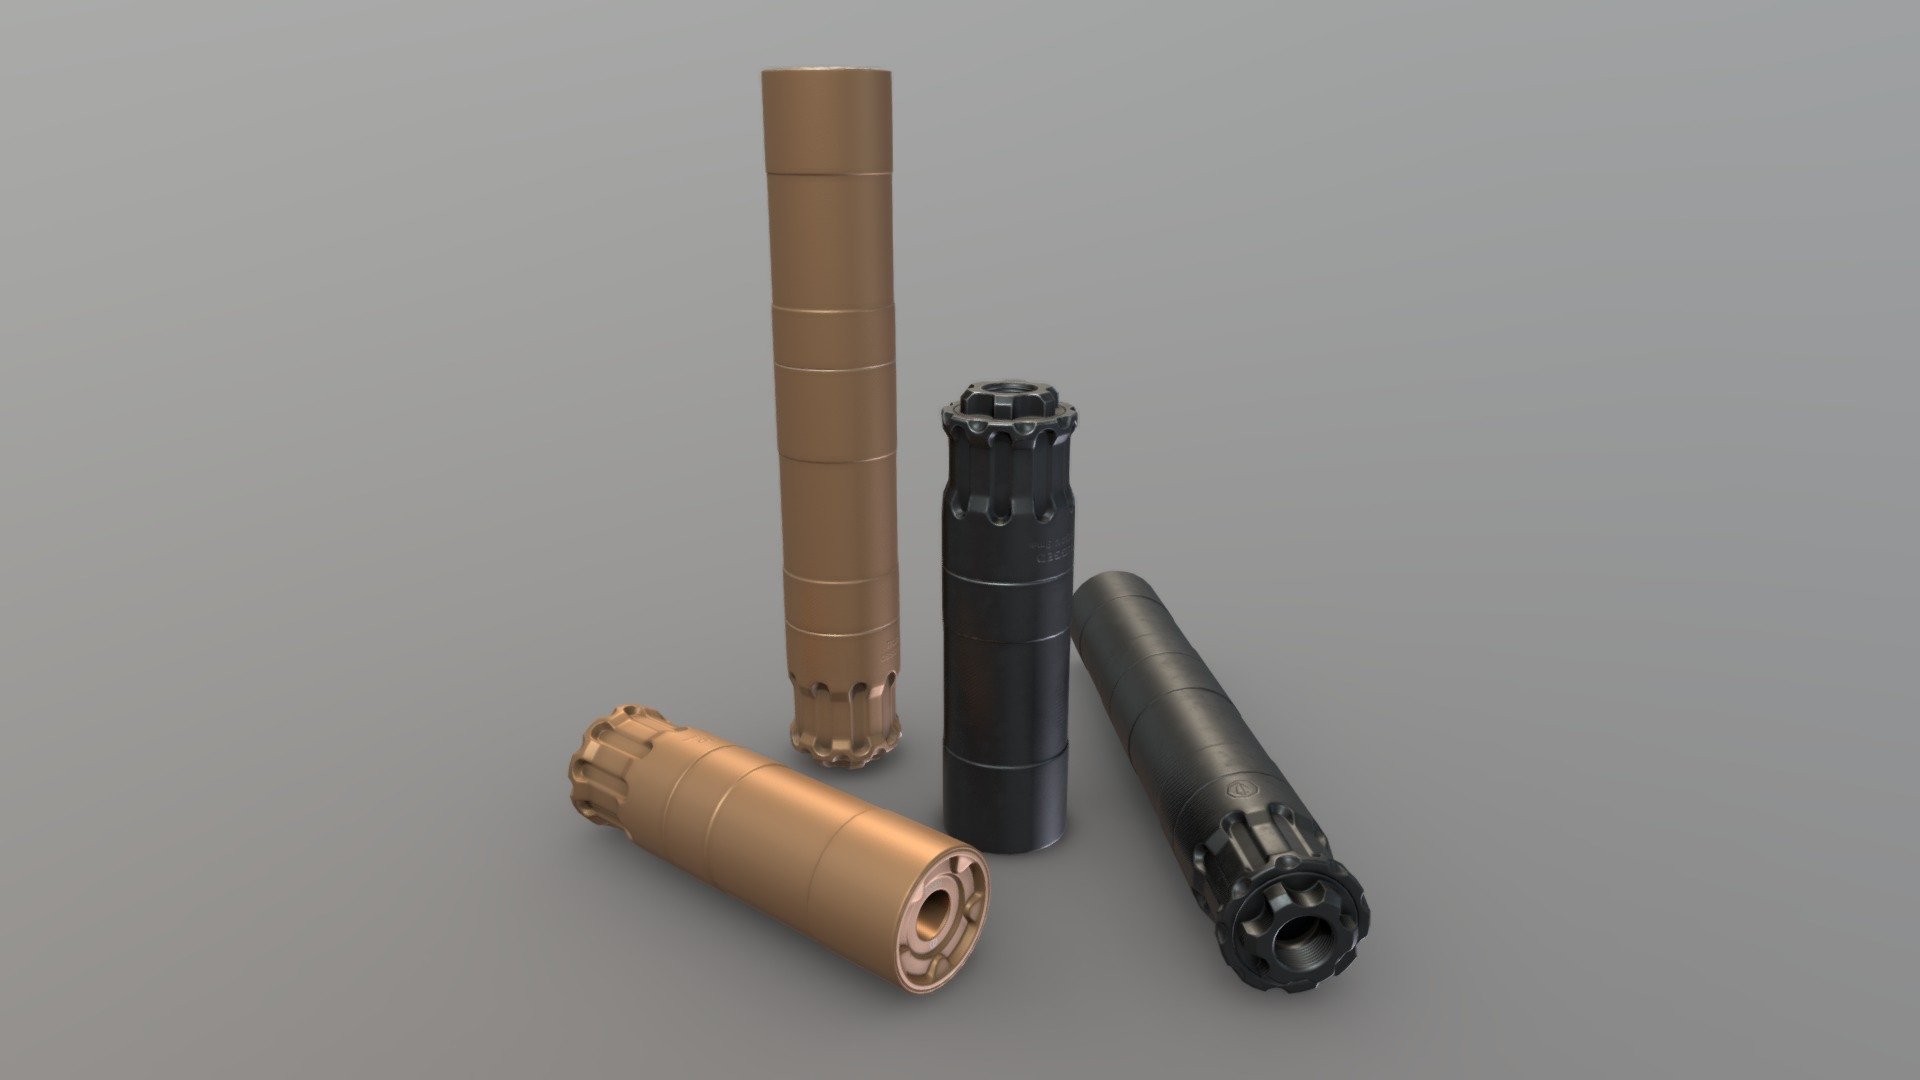 Game-ready low-poly model


Two versions, short and full length
Two color options - Black and FDE (Clean and Worn)

Poly / Verts Count:


Short: 2424 / 1295
Full: 2856 / 1538
 - Rugged Obsidian 9mm Suppressor - Download Free 3D model by eNse7en 3d model